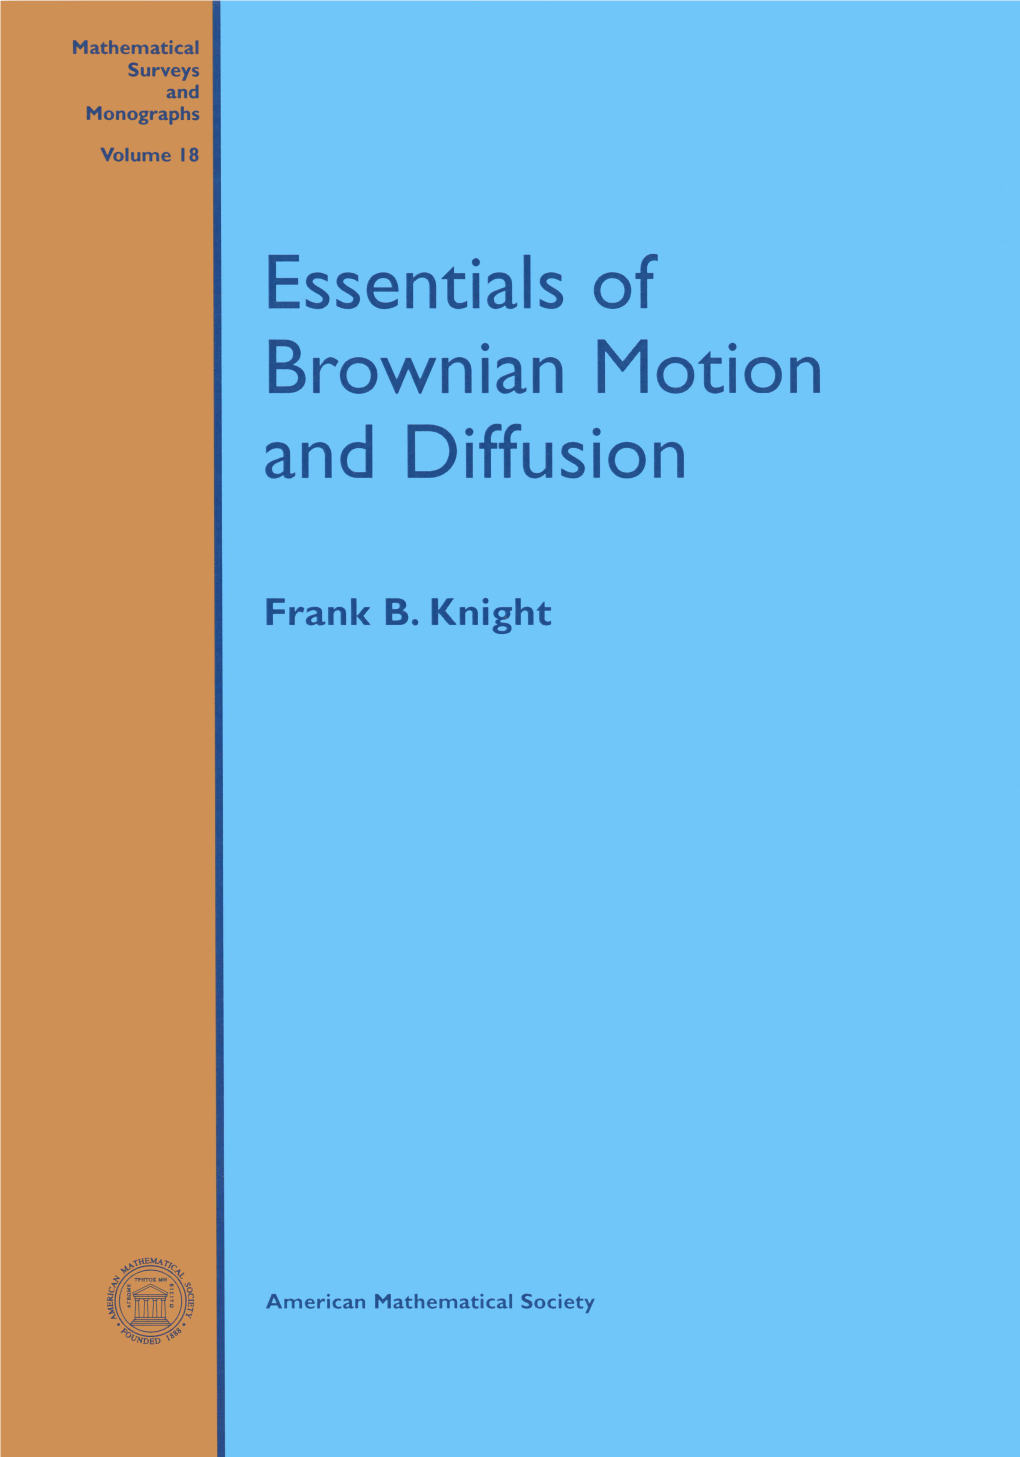 Essentials of Brownian Motion and Diffusion Mathematical Surveys and Monographs Volume 18